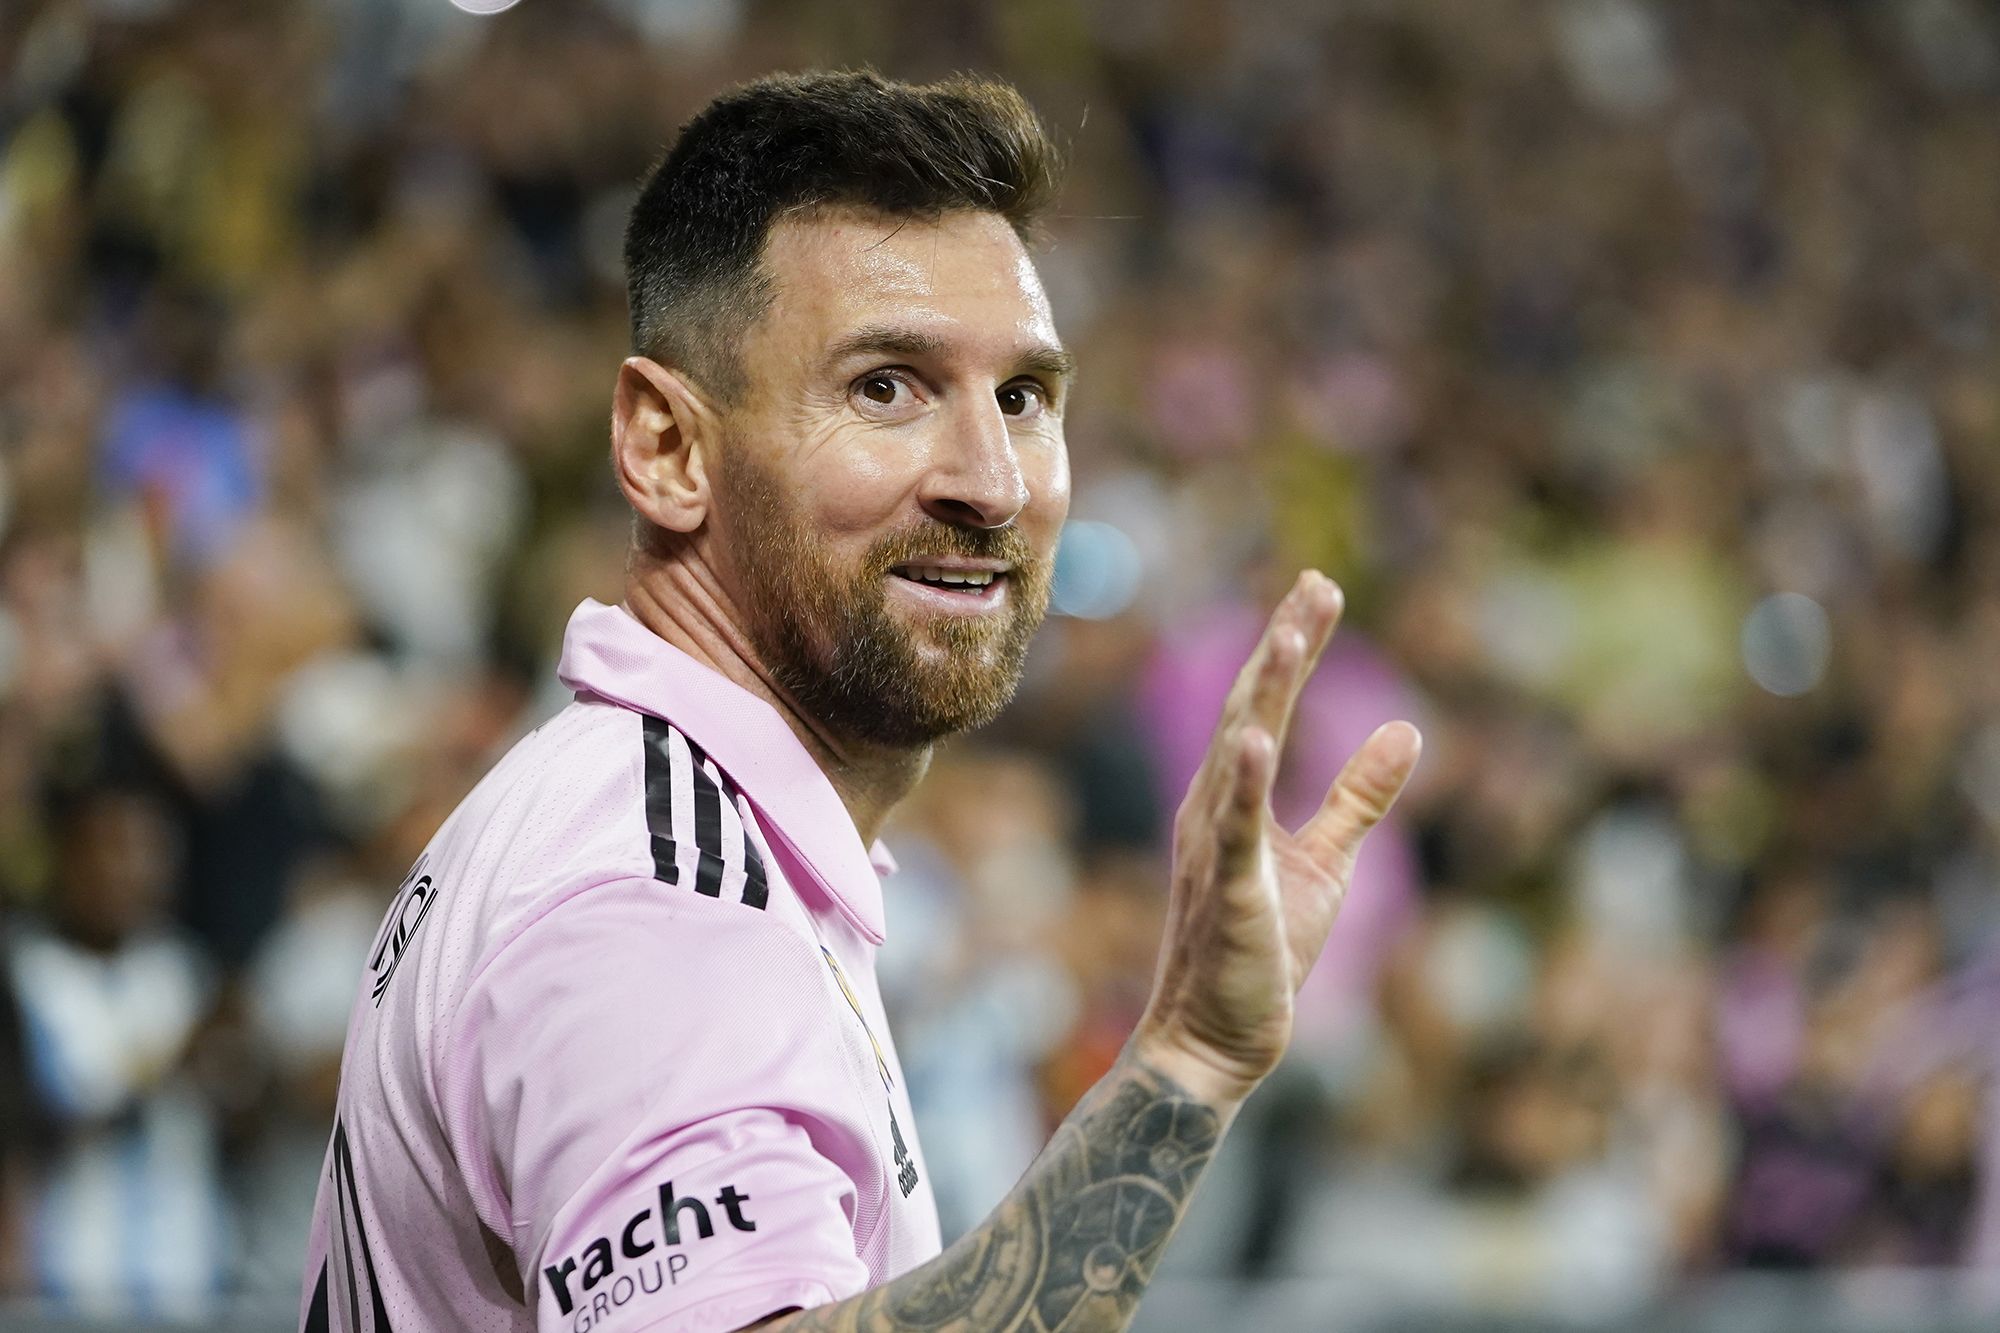 Leo Messi sparks a surge in Major League Soccer subscription sign